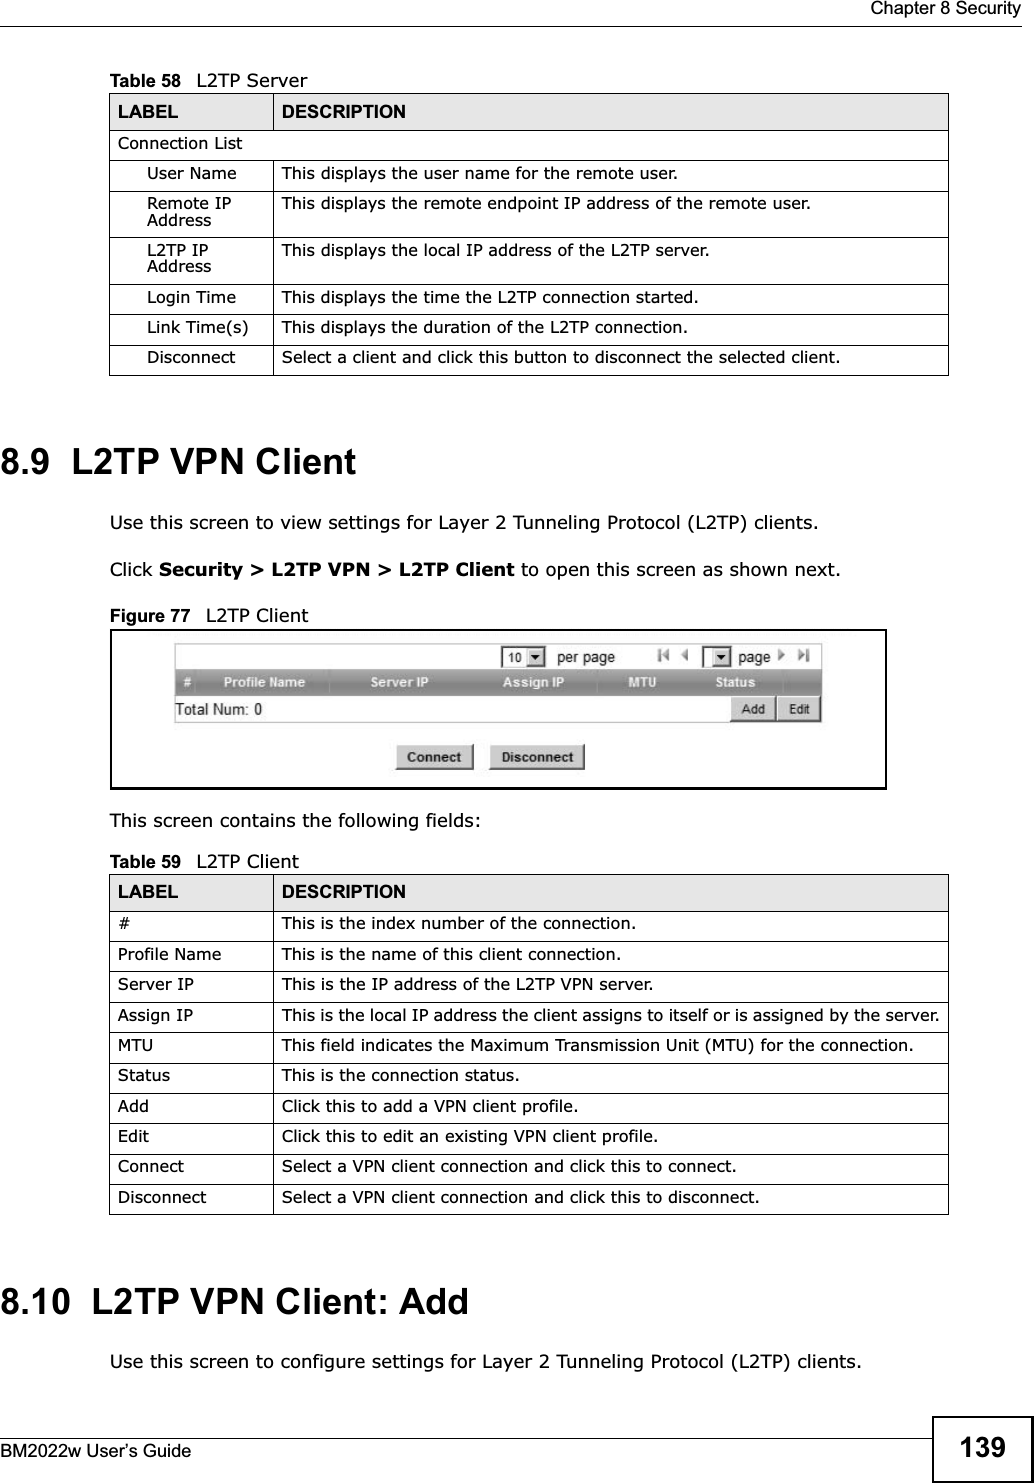  Chapter 8 SecurityBM2022w User’s Guide 1398.9  L2TP VPN ClientUse this screen to view settings for Layer 2 Tunneling Protocol (L2TP) clients.Click Security &gt; L2TP VPN &gt; L2TP Client to open this screen as shown next.Figure 77   L2TP ClientThis screen contains the following fields:8.10  L2TP VPN Client: AddUse this screen to configure settings for Layer 2 Tunneling Protocol (L2TP) clients.Connection ListUser Name This displays the user name for the remote user.Remote IP Address This displays the remote endpoint IP address of the remote user.L2TP IP Address This displays the local IP address of the L2TP server.Login Time This displays the time the L2TP connection started.Link Time(s) This displays the duration of the L2TP connection.Disconnect Select a client and click this button to disconnect the selected client.Table 58   L2TP ServerLABEL DESCRIPTIONTable 59   L2TP ClientLABEL DESCRIPTION# This is the index number of the connection.Profile Name This is the name of this client connection.Server IP This is the IP address of the L2TP VPN server.Assign IP This is the local IP address the client assigns to itself or is assigned by the server.MTU This field indicates the Maximum Transmission Unit (MTU) for the connection.Status This is the connection status.Add Click this to add a VPN client profile.Edit Click this to edit an existing VPN client profile.Connect Select a VPN client connection and click this to connect.Disconnect Select a VPN client connection and click this to disconnect.